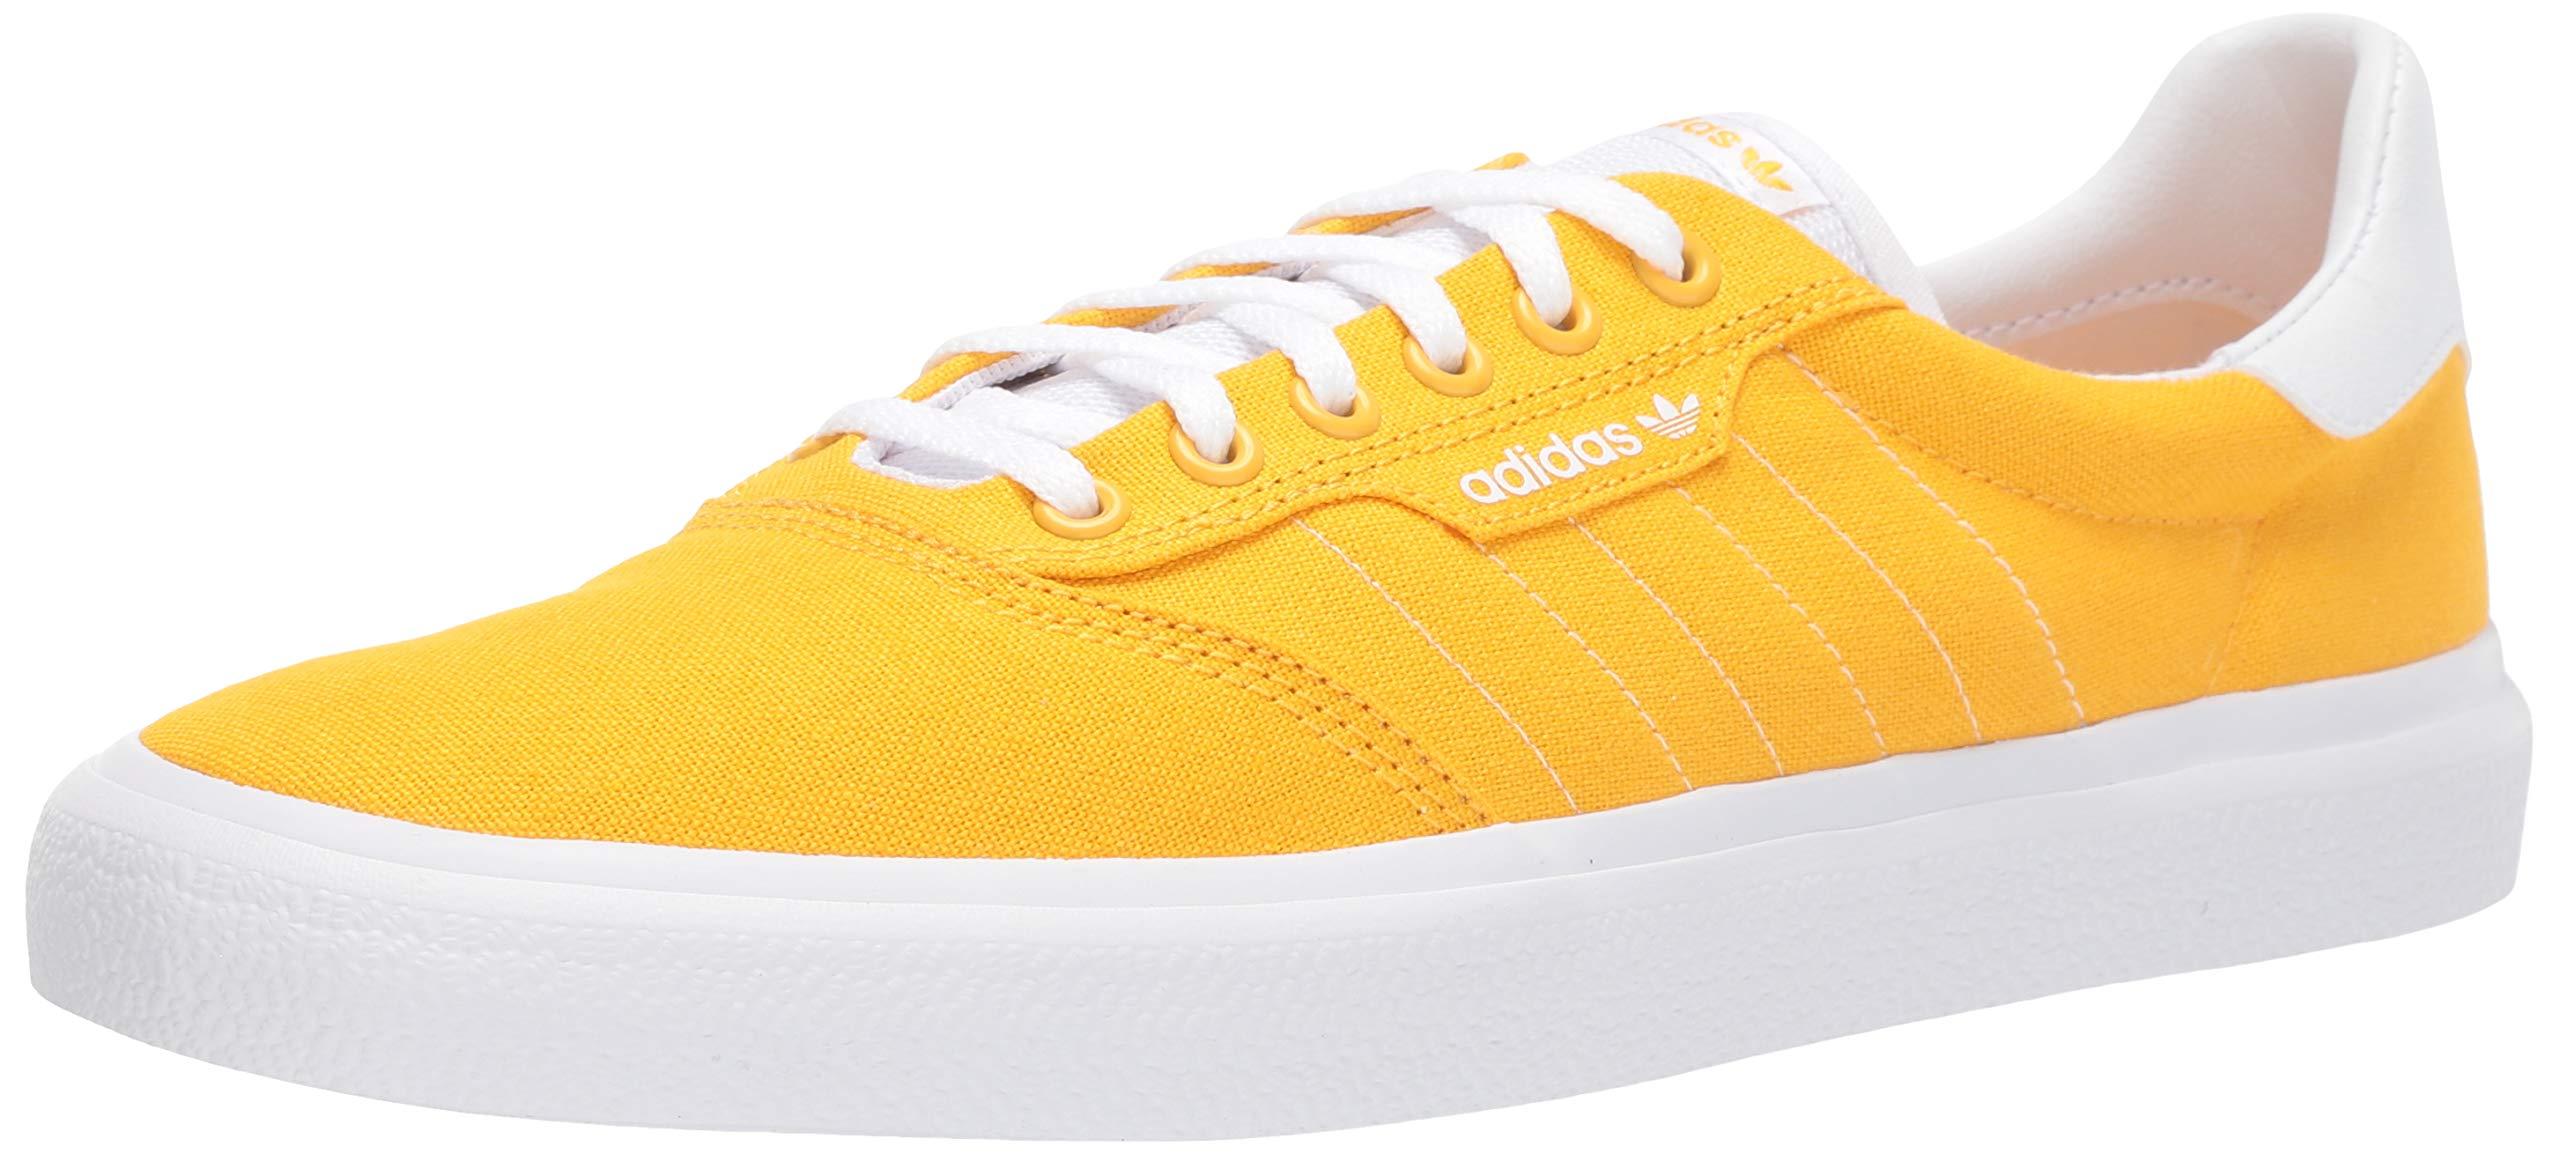 adidas 3mc Skate Shoes in White - Save 63% - Lyst